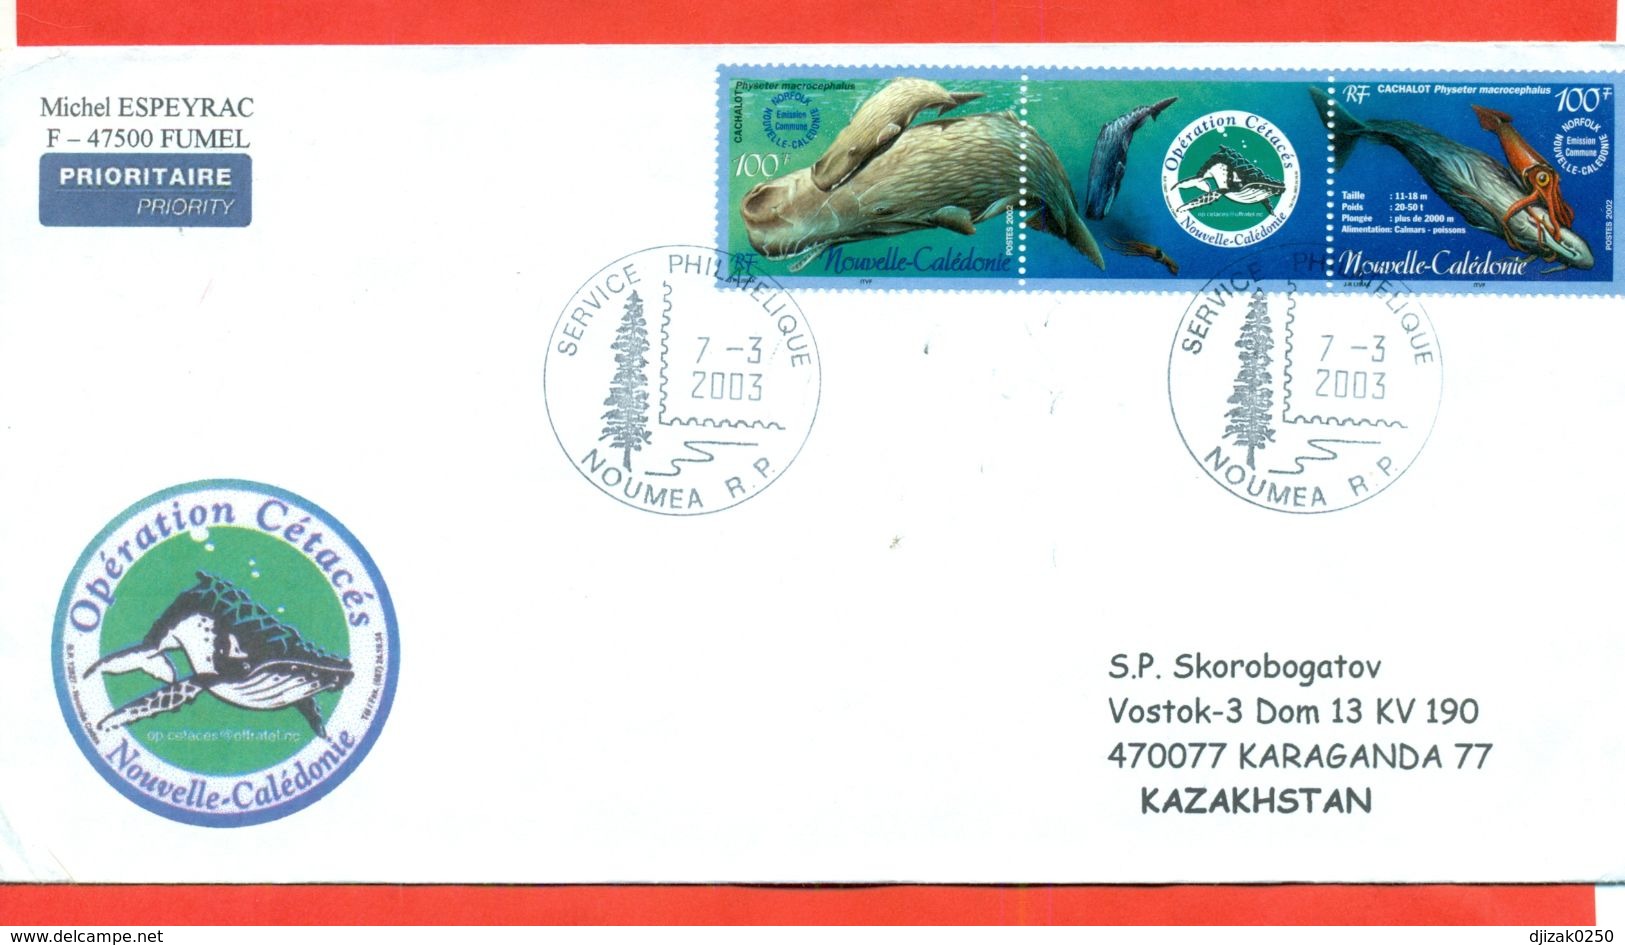 New Caledonia 2002. Whales.The Envelope Actually Passed The Mail. - Covers & Documents